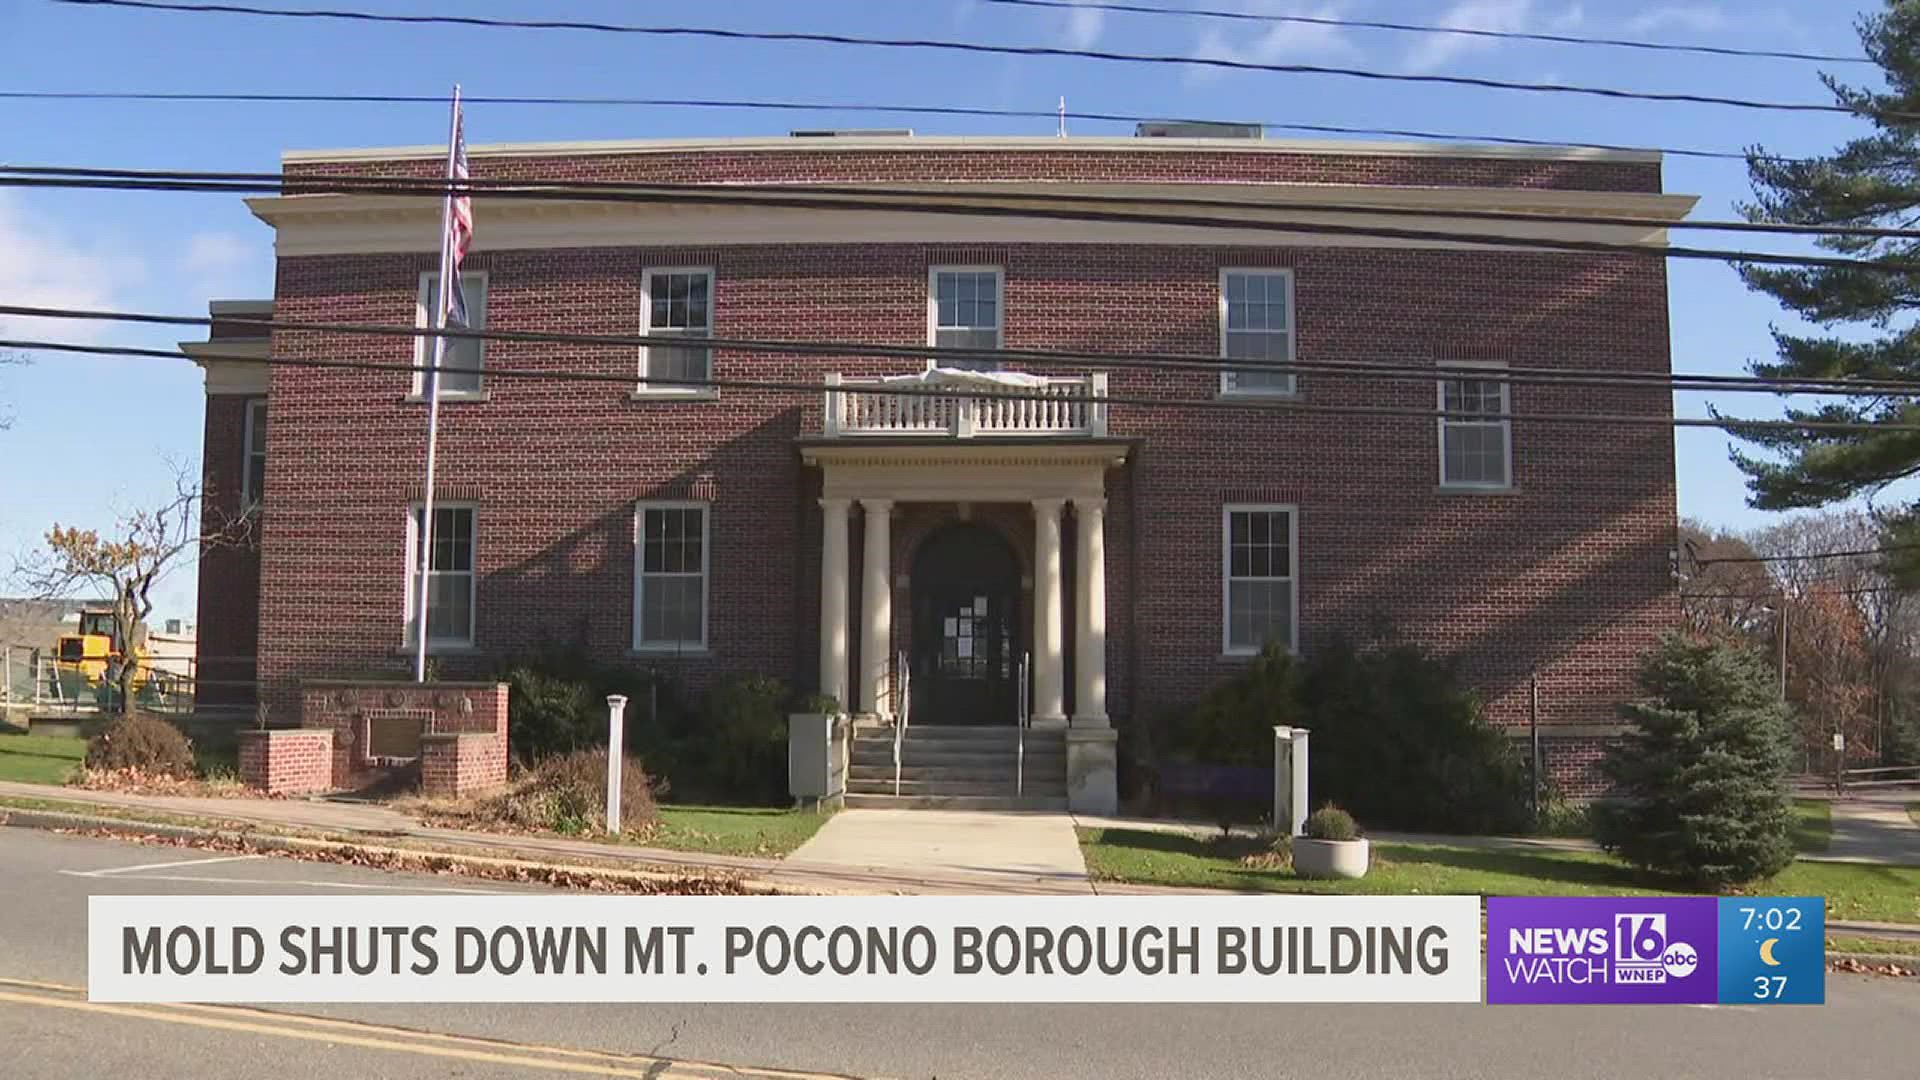 Mold was discovered in the basement of the Mount Pocono borough building after a few employees started to feel sick. The building is closed until further notice.